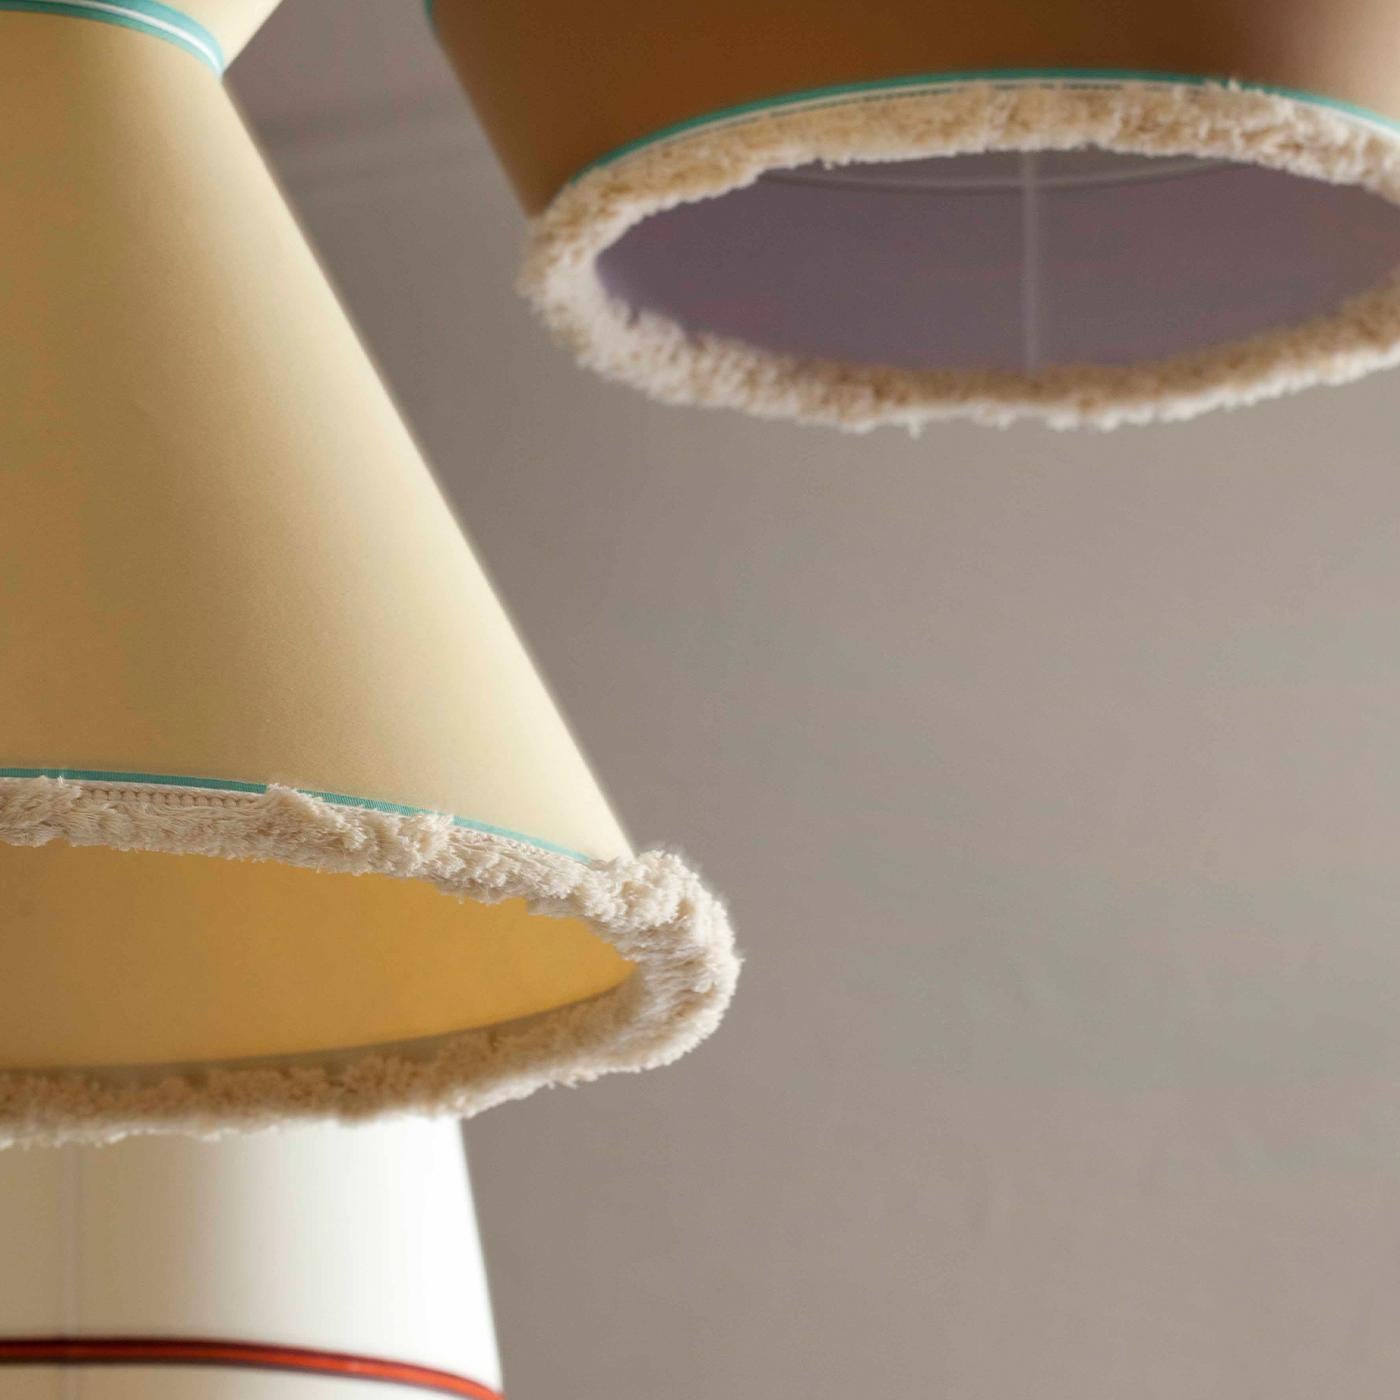 The Easy Roof series is all about plain shapes and uncommon color combinations. The lampshade cotton fabric is presented in block colors with contrasted trimmings and fringing around the bottom rim. Suitable for LED Bulbs Cable. Lampshade Cotton